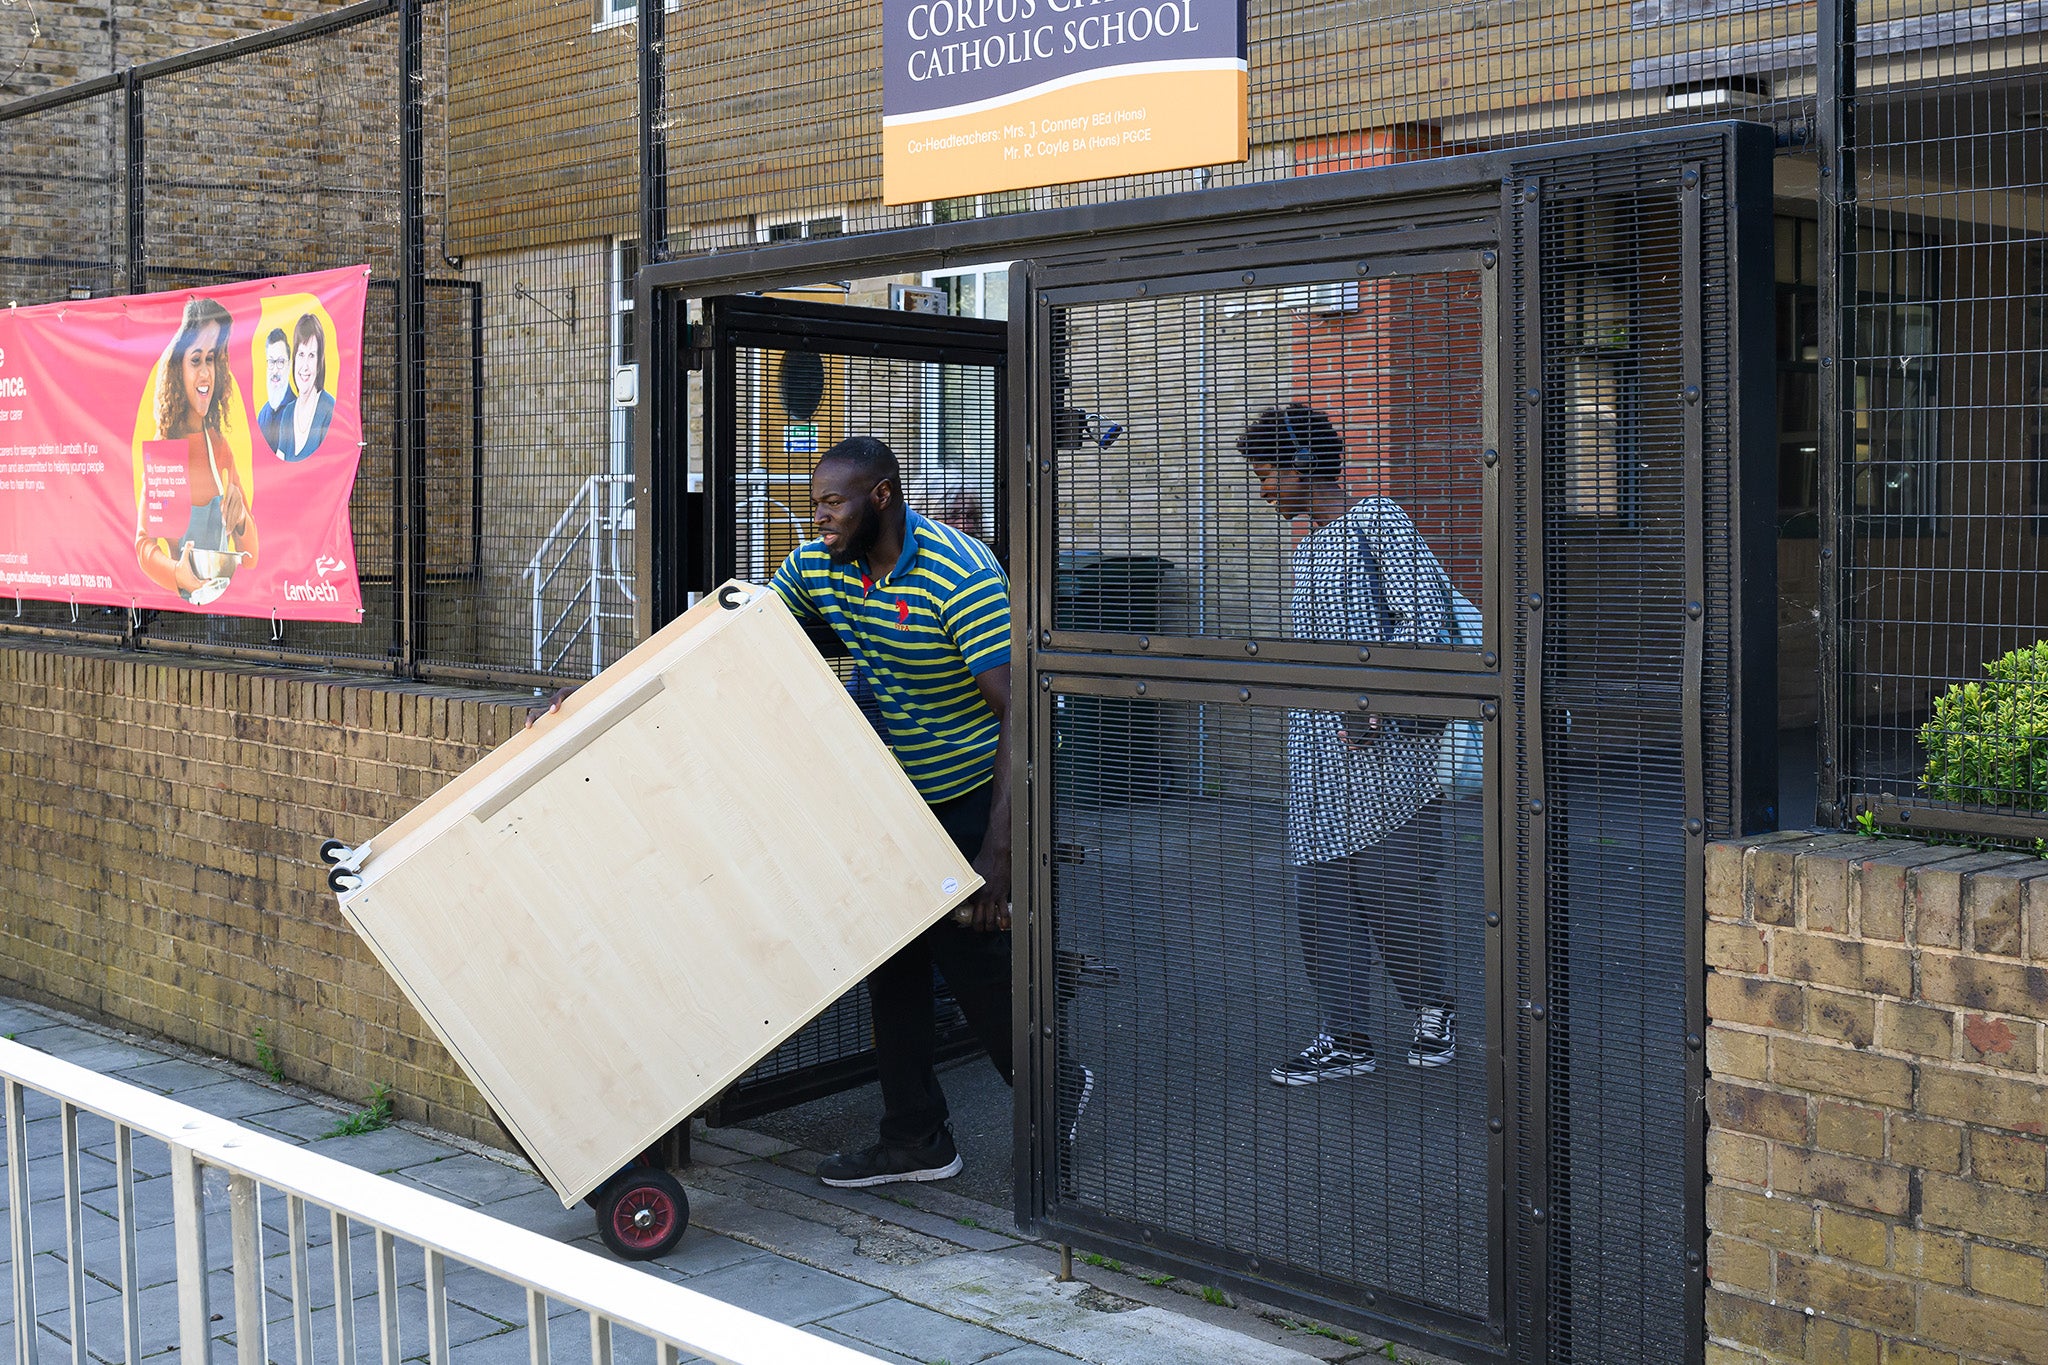 A piece of furniture is removed from a building at Corpus Christi Catholic School in London after it was warned over crumbling concrete